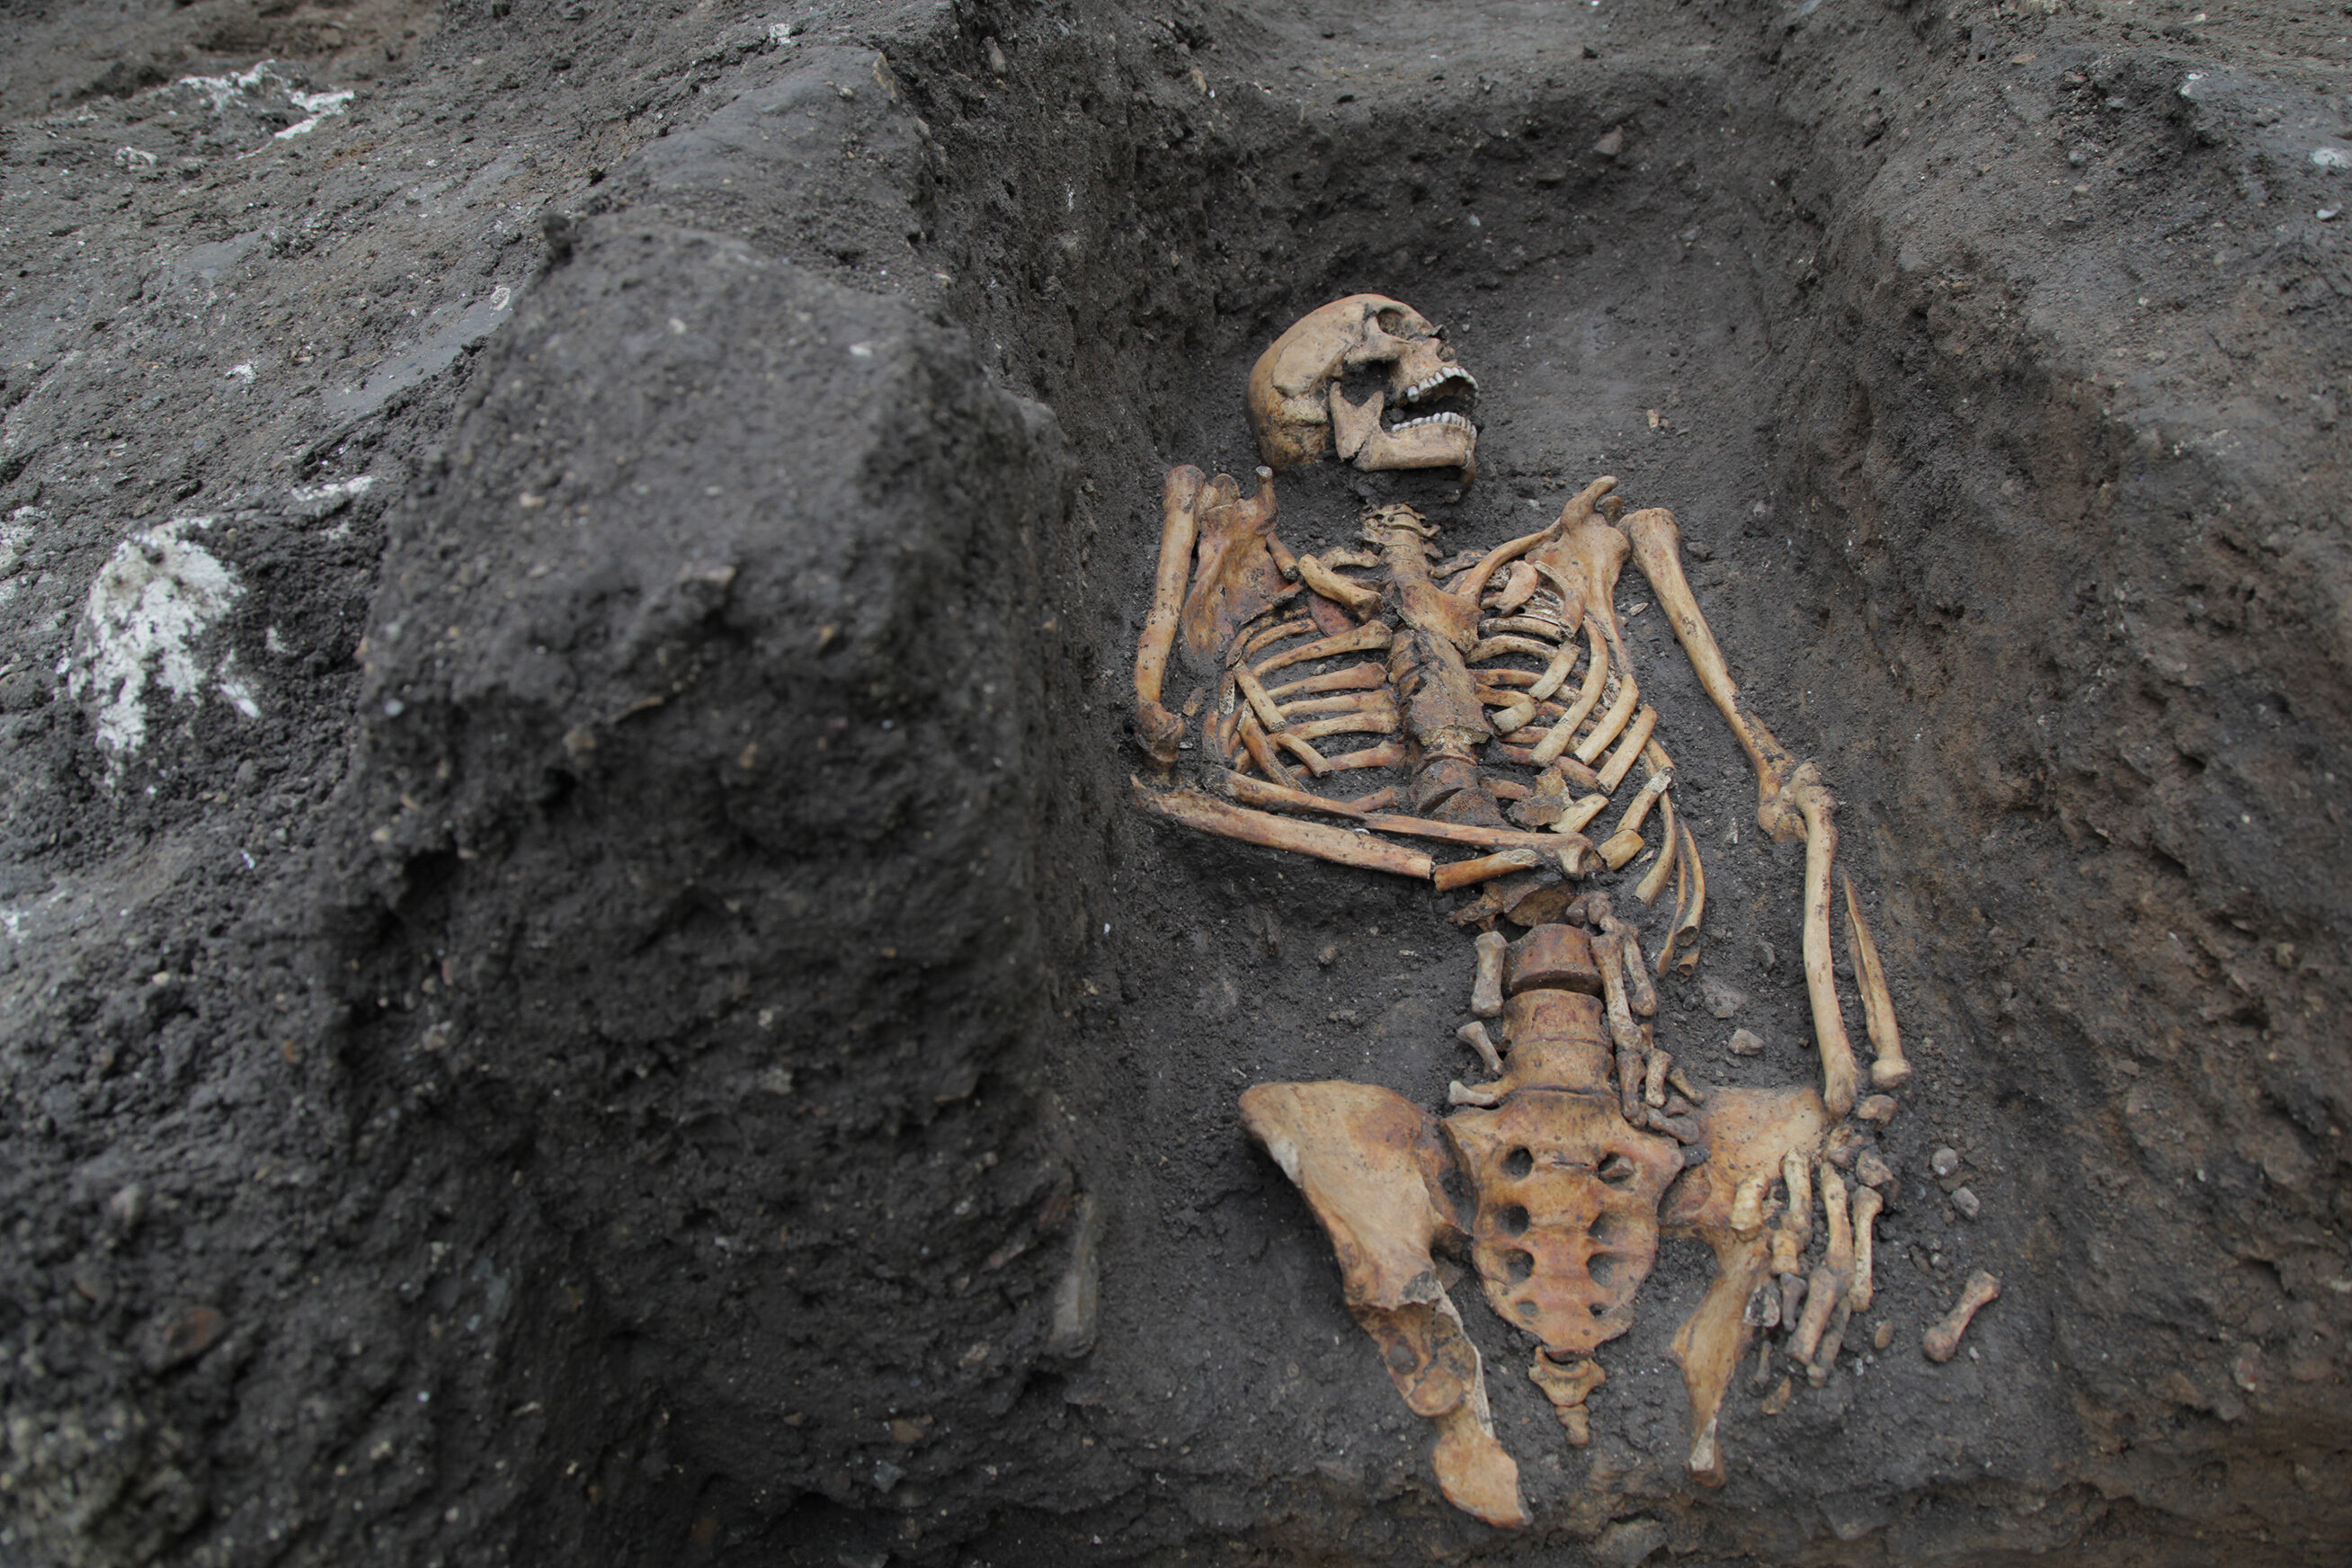 Inequality in medieval Cambridge was “recorded in the bones” of its residents